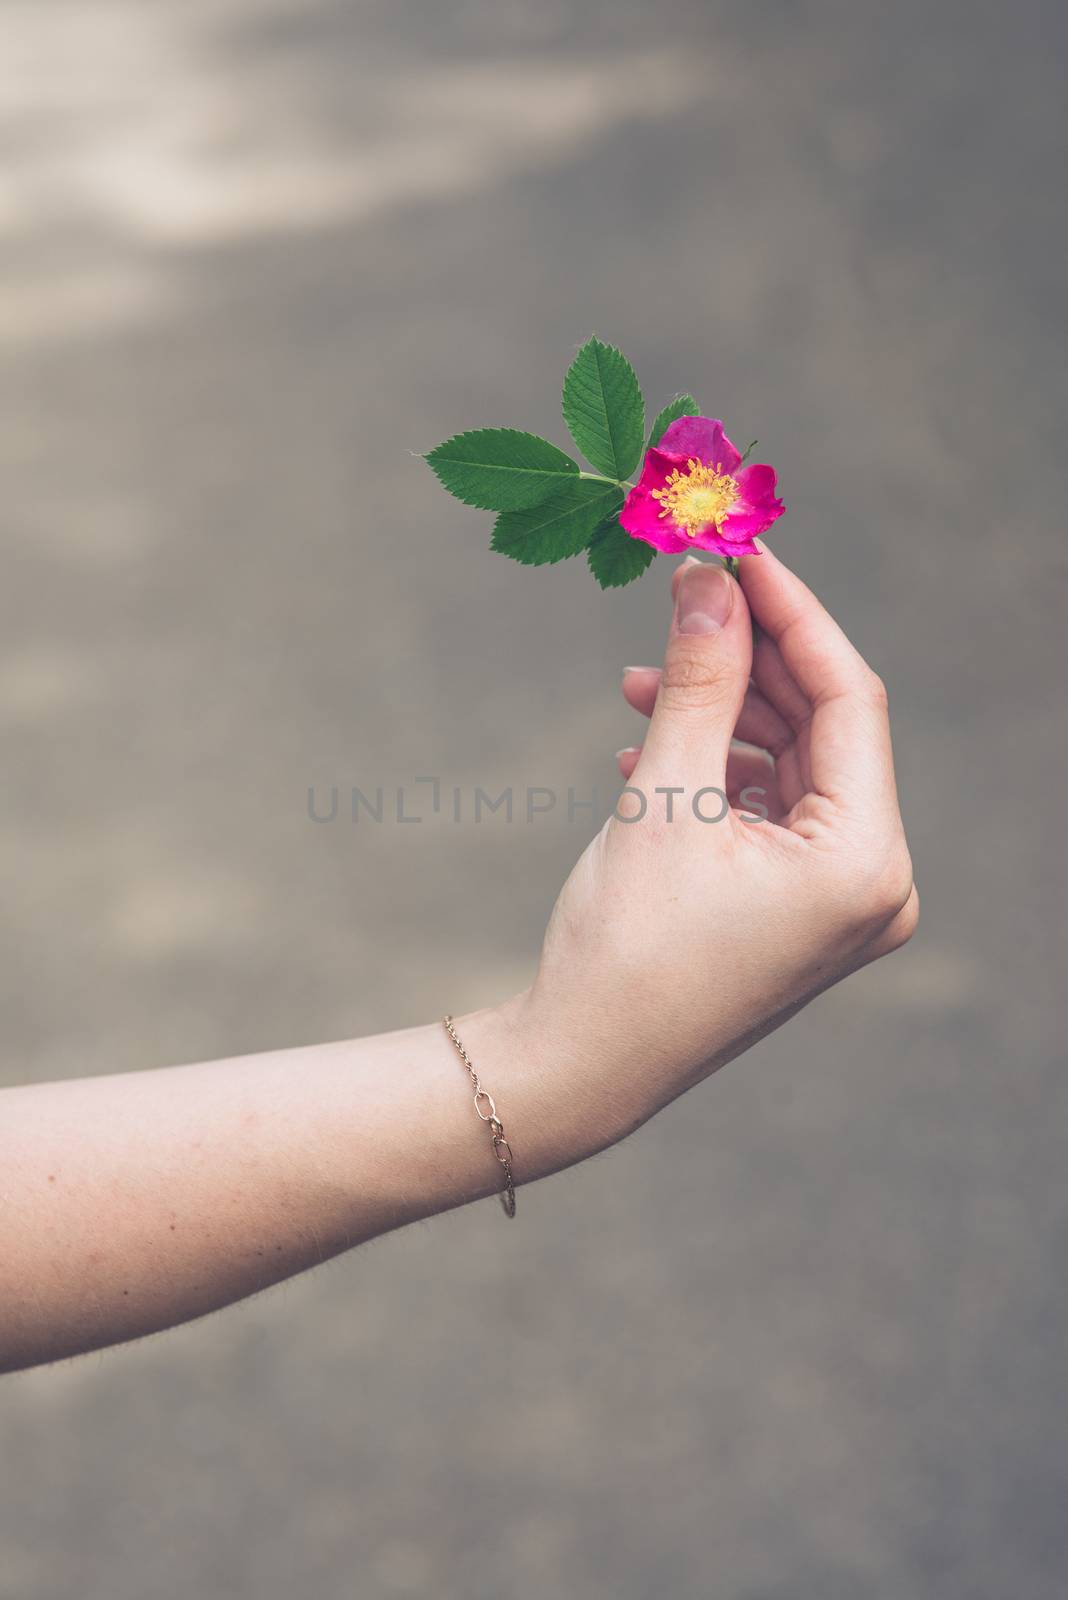 the hand of the girl with the golden chain keeps the redflower briar against blurred background with copyspace.